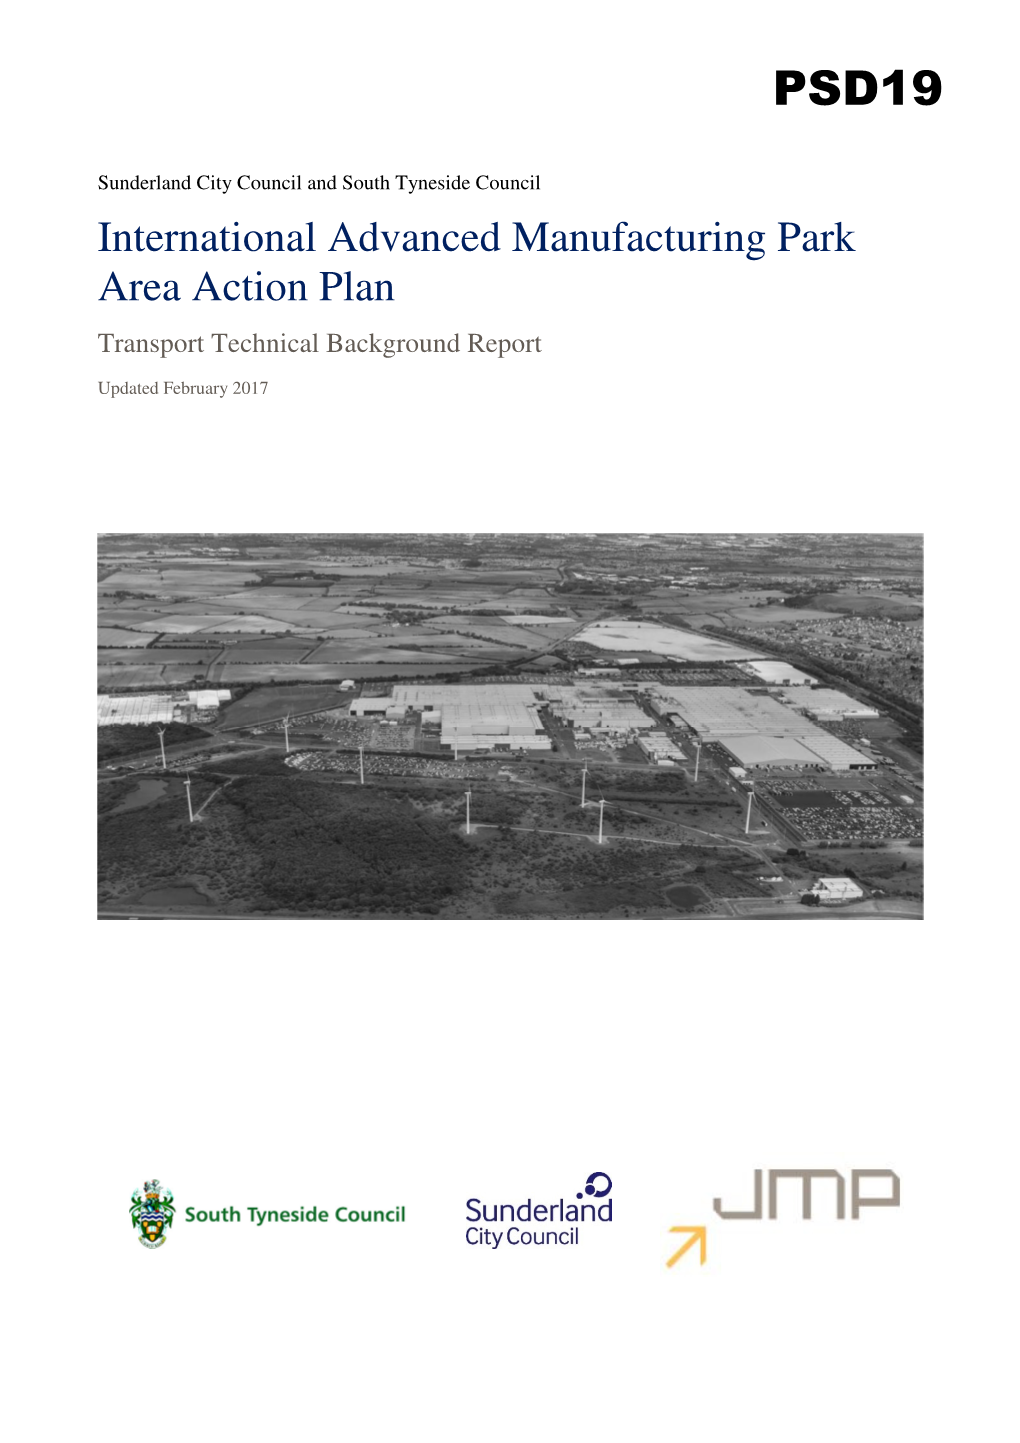 International Advanced Manufacturing Park Area Action Plan Transport Technical Background Report